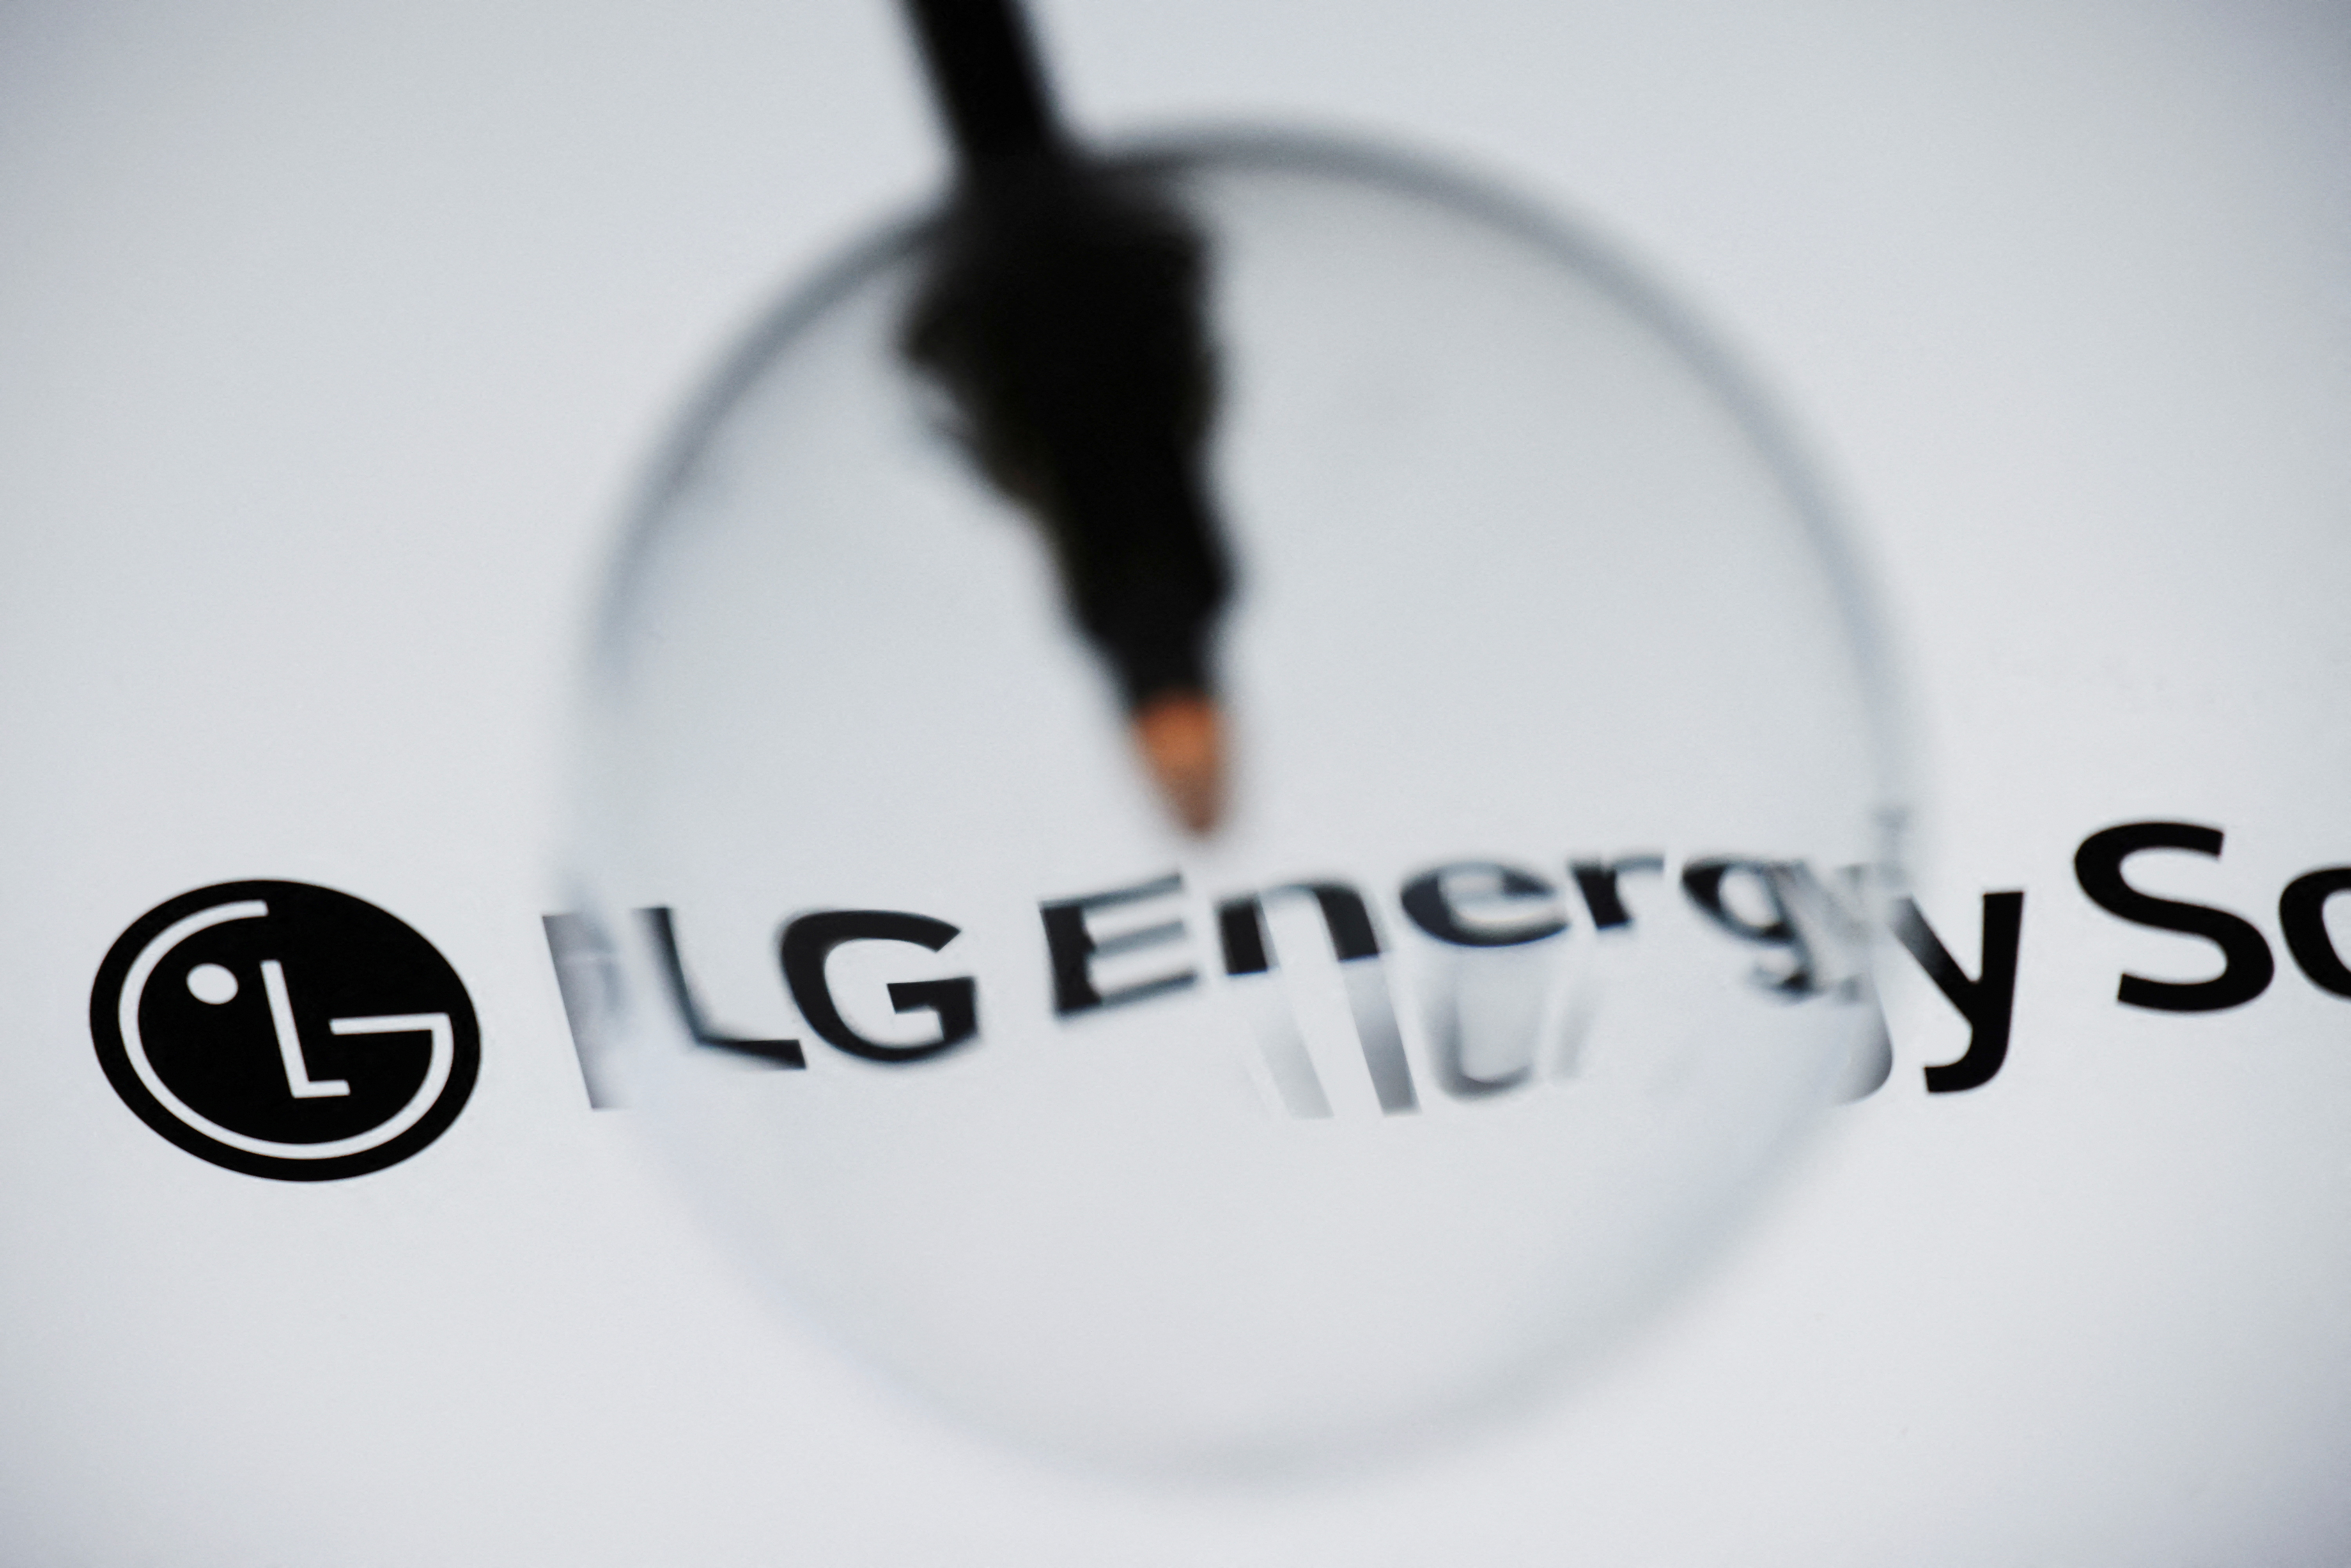 The logo of LG Energy Solution is pictured at its office building in Seoul